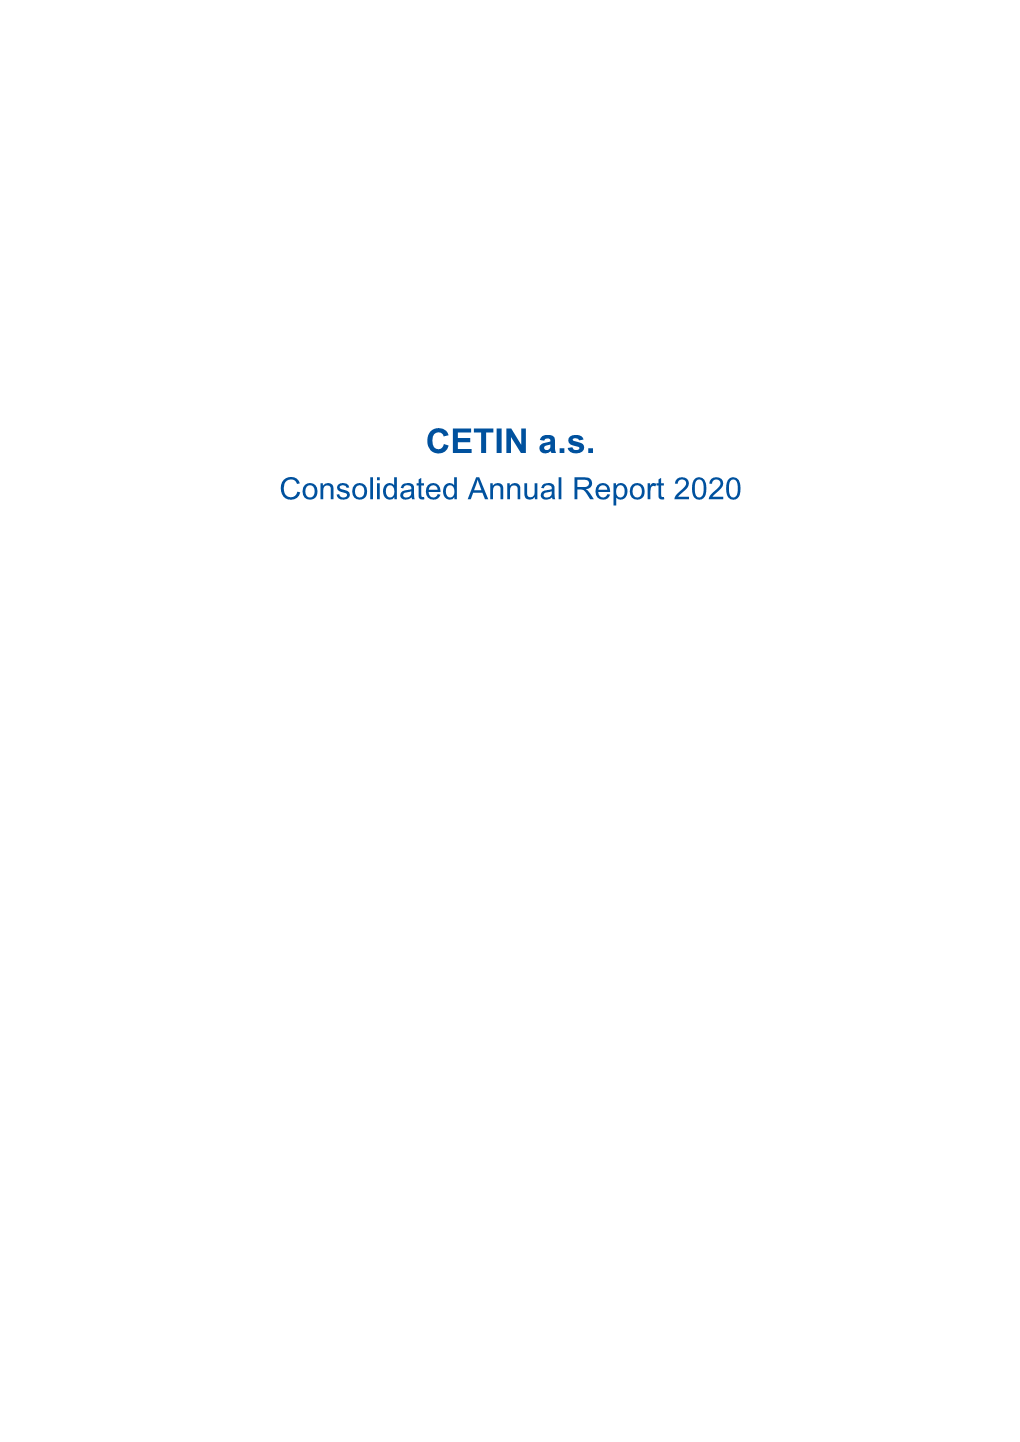 CETIN A.S. Consolidated Annual Report 2020